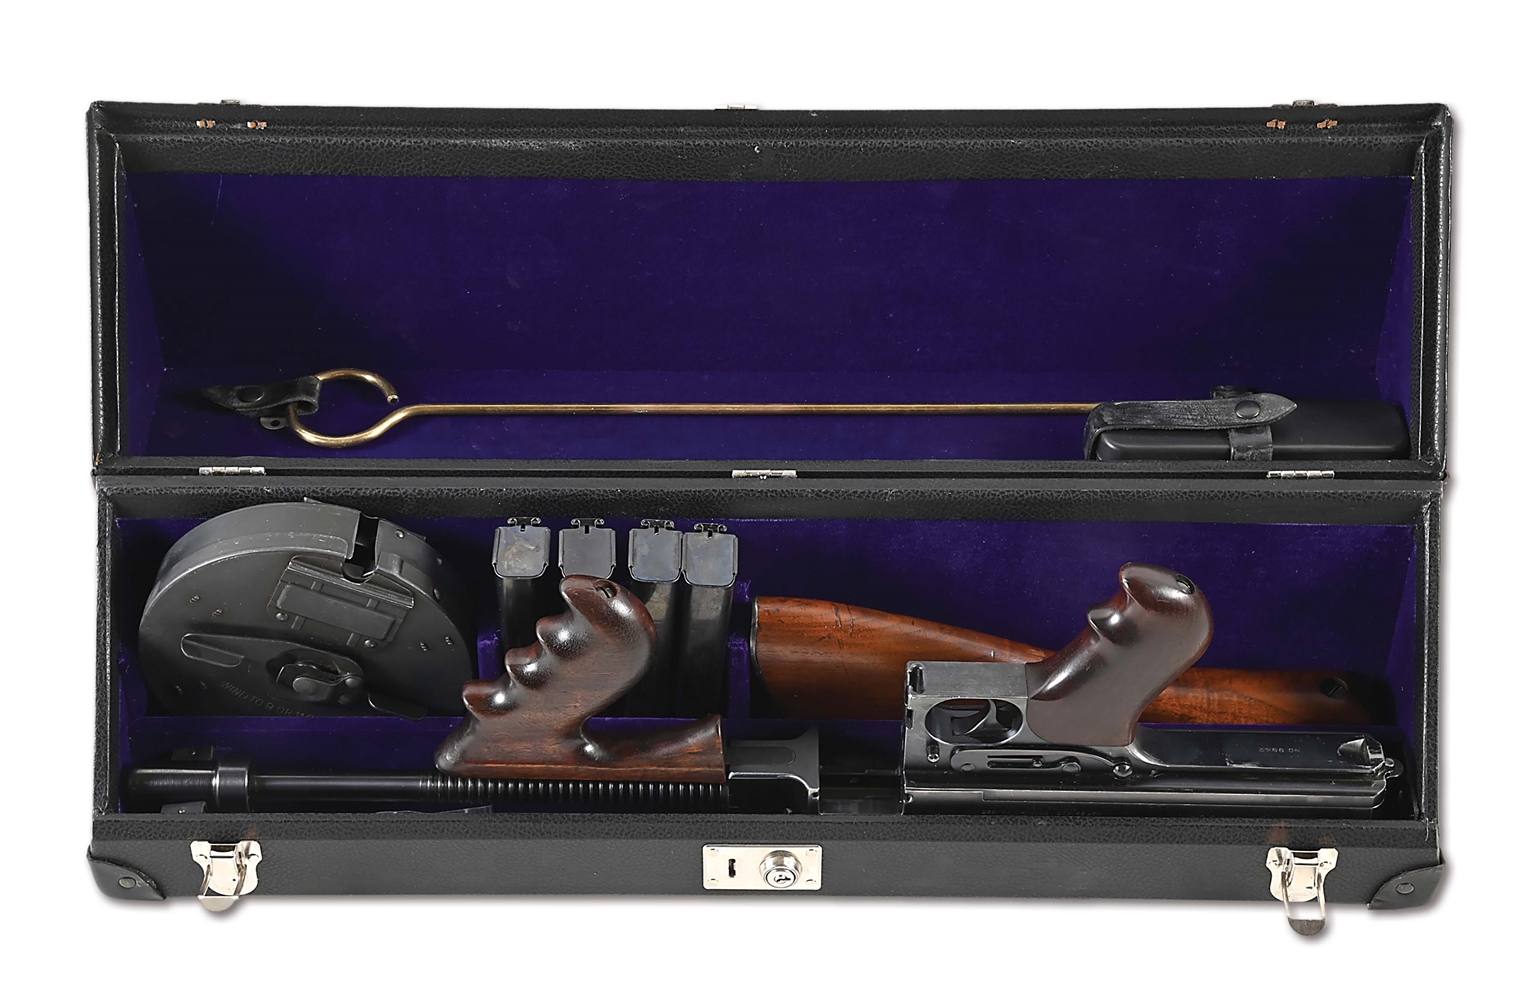 (N) ESPECIALLY ATTRACTIVE HIGH CONDITION COLT 1921AC THOMPSON MACHINE GUN WITH REPRODUCTION HARD CASE (CURIO AND RELIC).